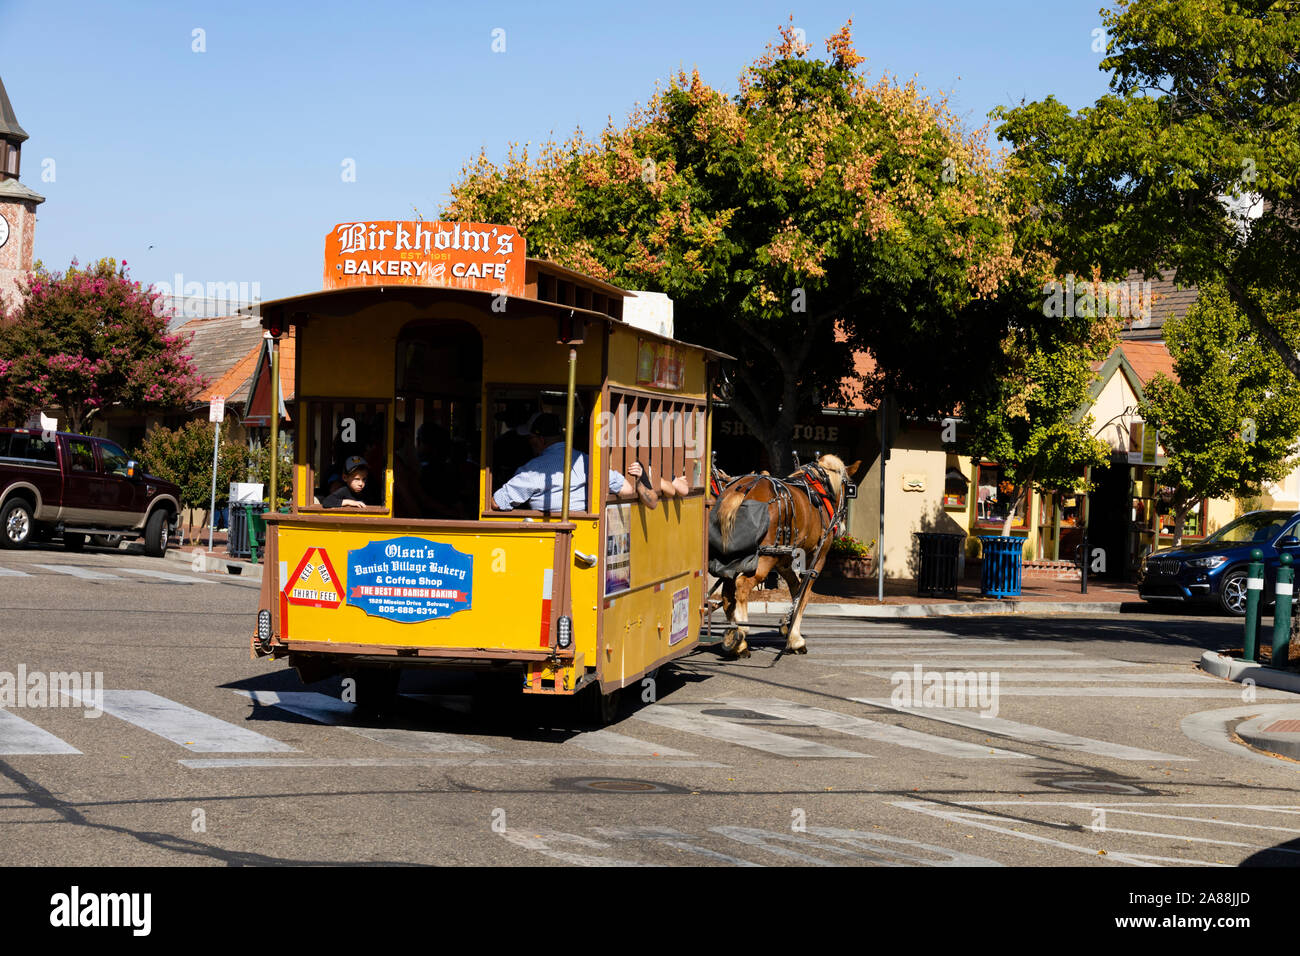 Two horse drawn trolley bus, The Danish settlement of Solvang, Santa Barbara County, California, United States of America. Stock Photo